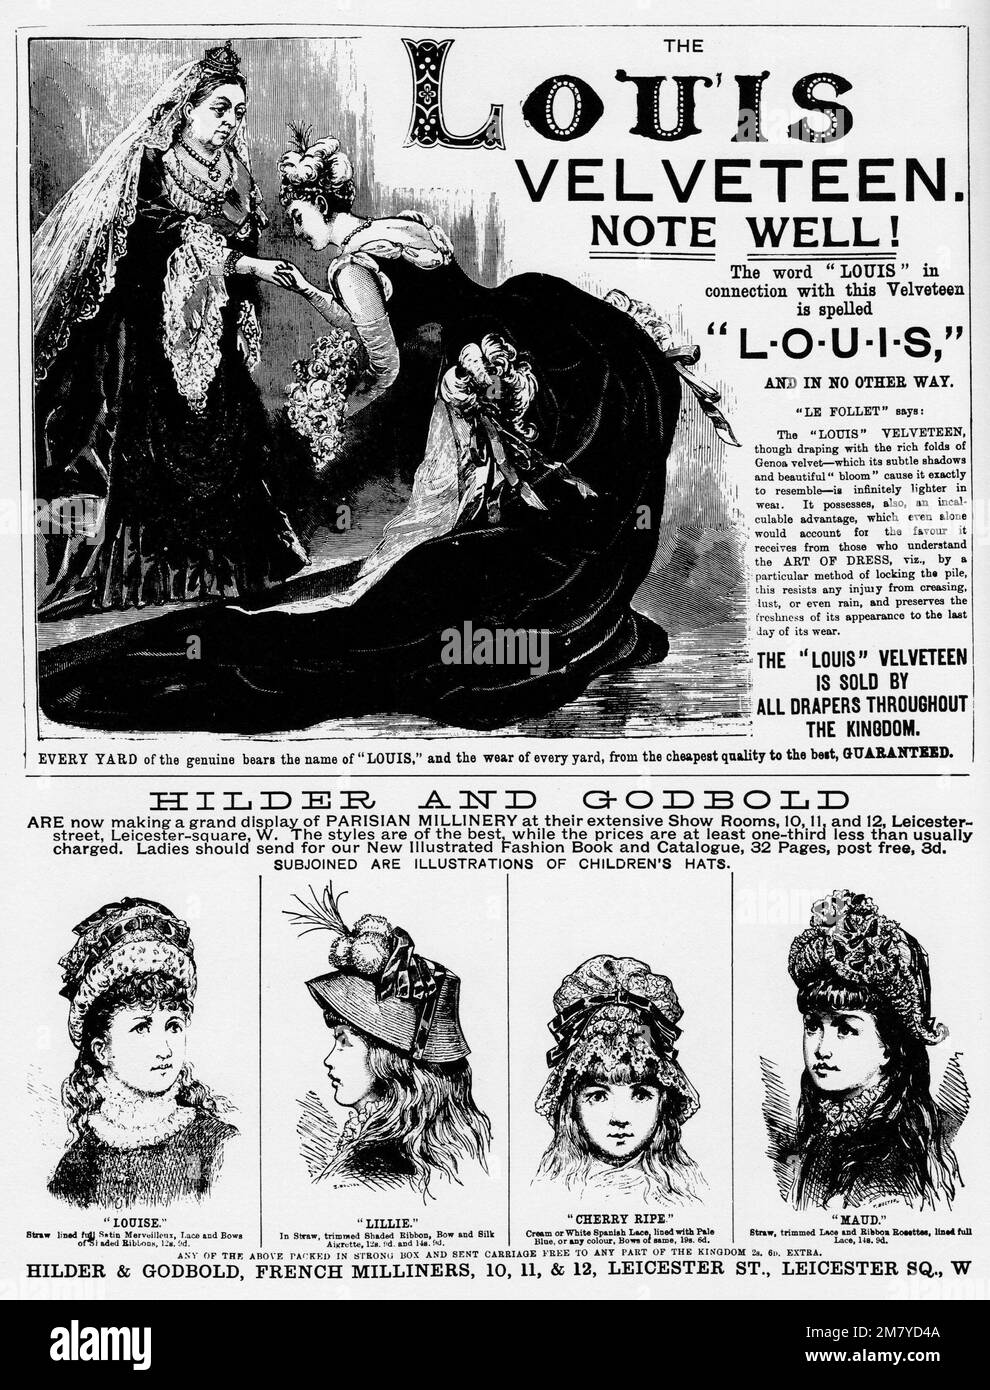 Victorian Newspaper Advertising c1890 for health and beauty products Stock Photo